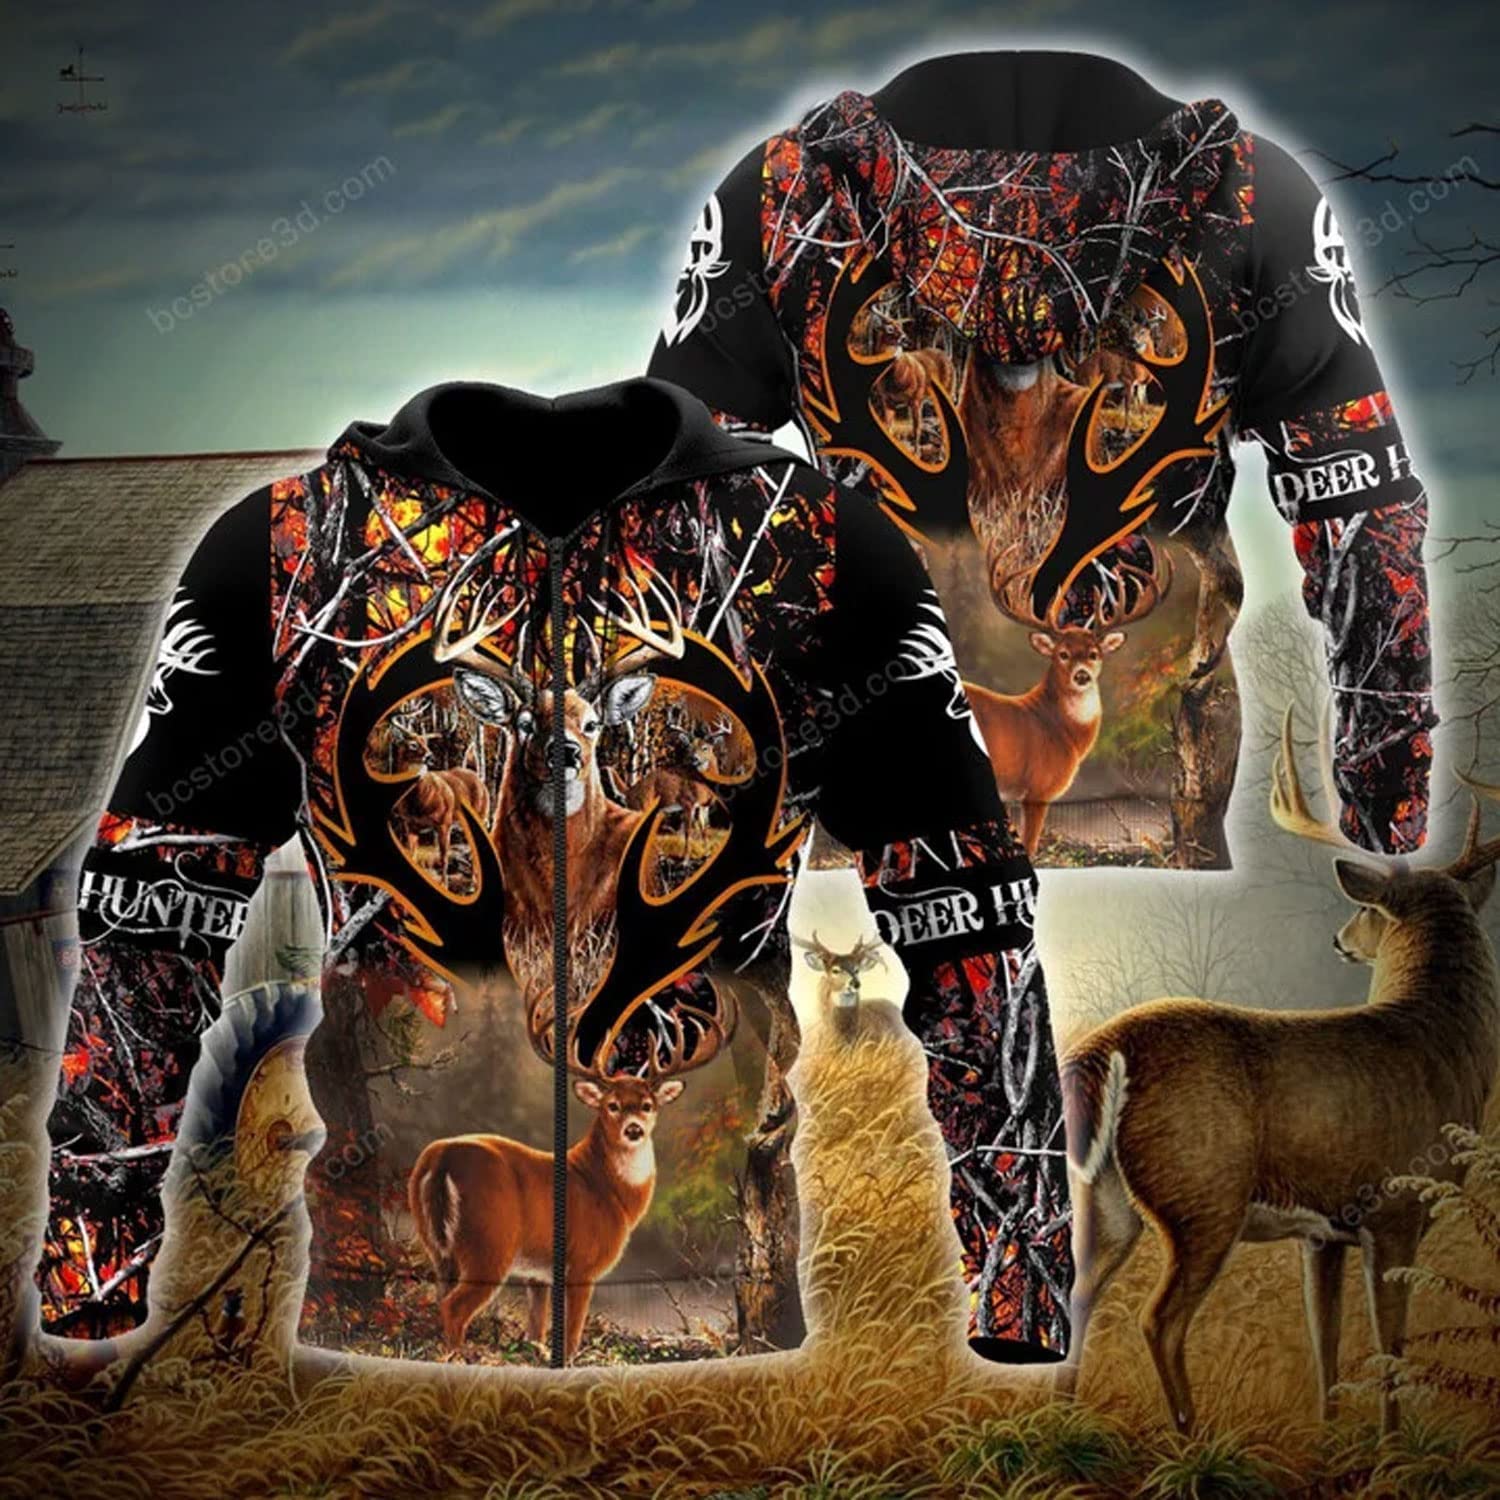 Deer Hunting 3D Full Print Shirt: An Amazing Gift for Deer Hunter Lovers and Families – JOT1541